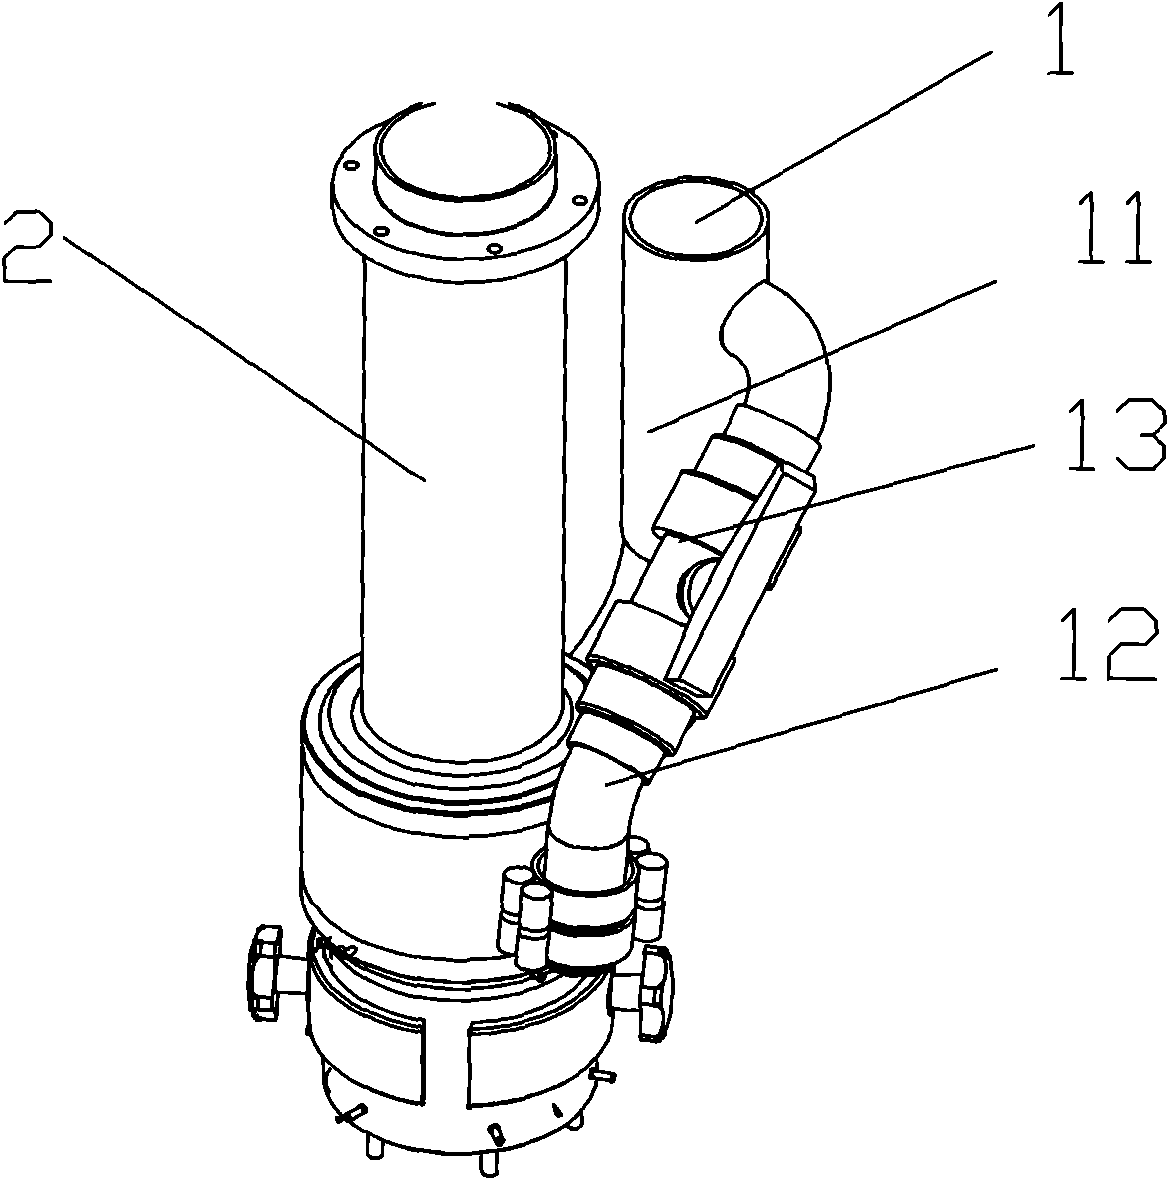 Integrated silt loosening and sucking device for removing silt